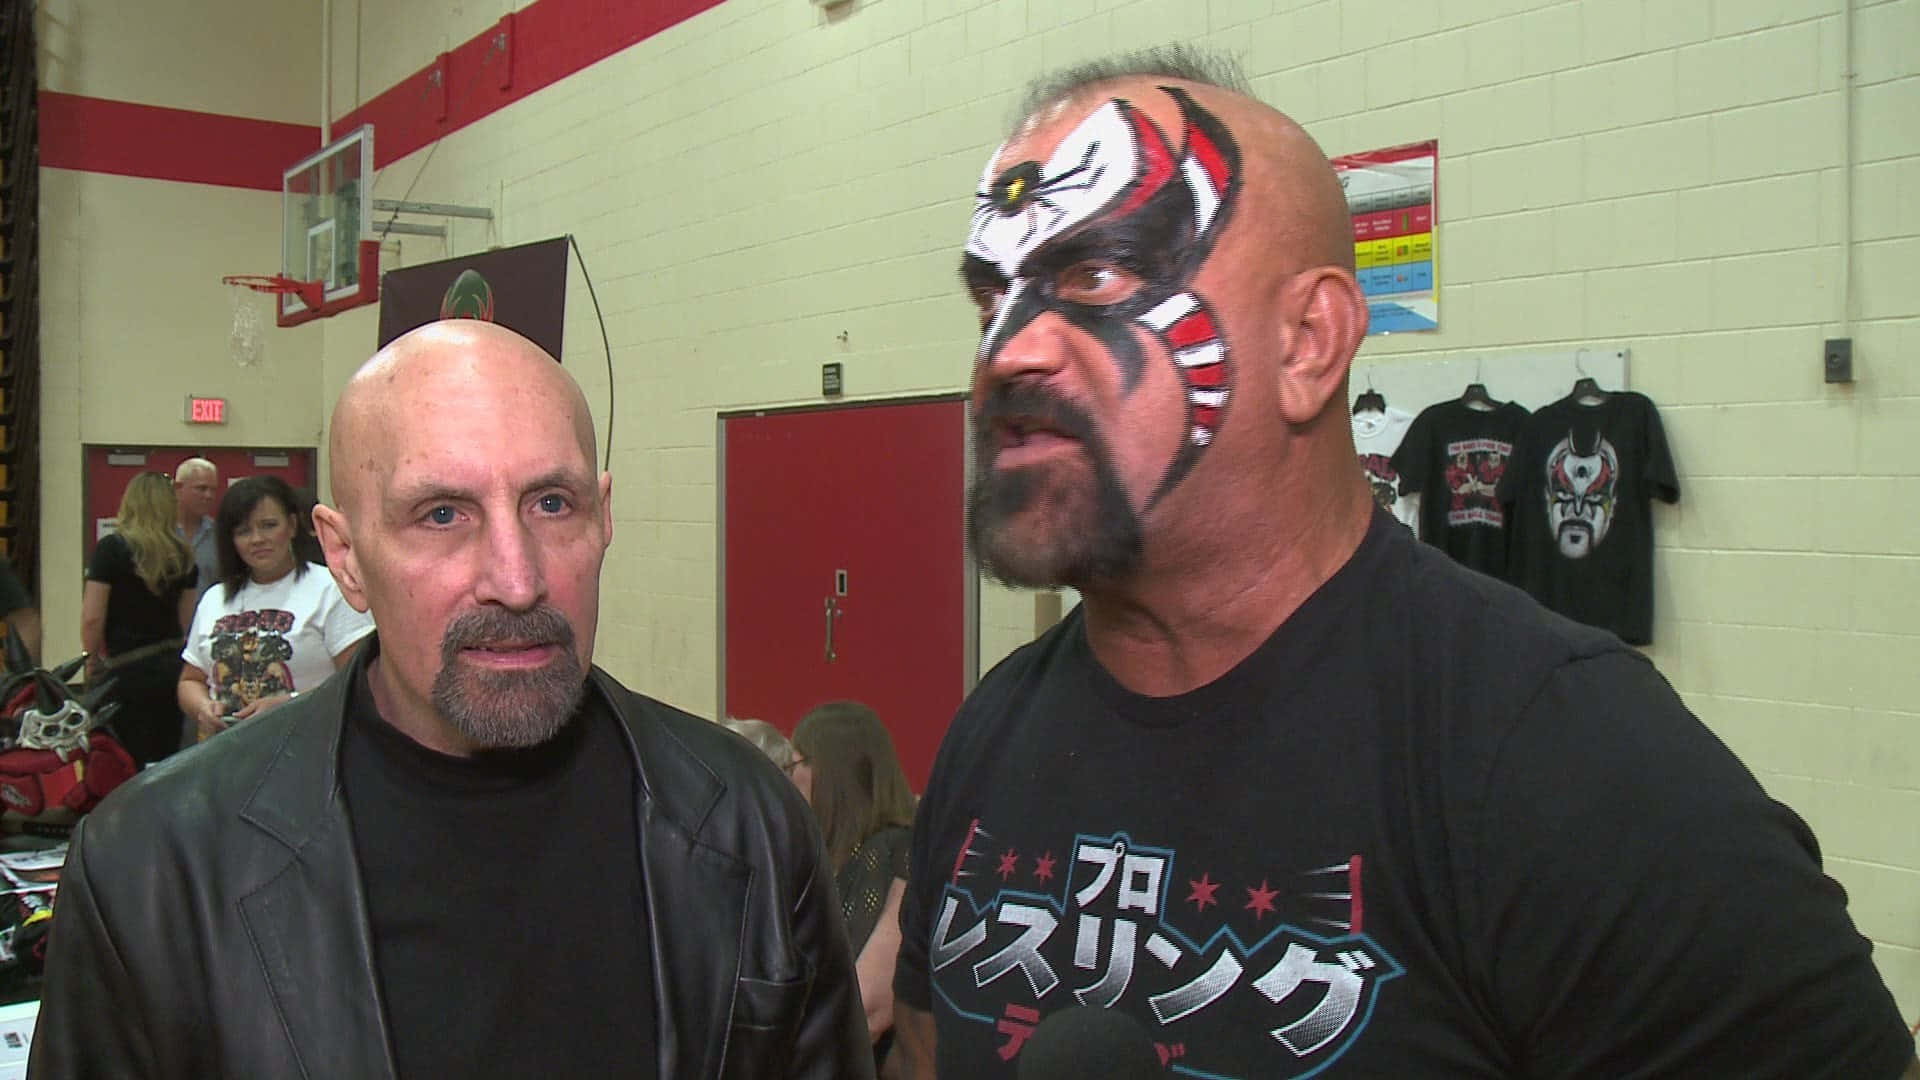 Road Warrior Animal And Manager Talks To Media Wallpaper